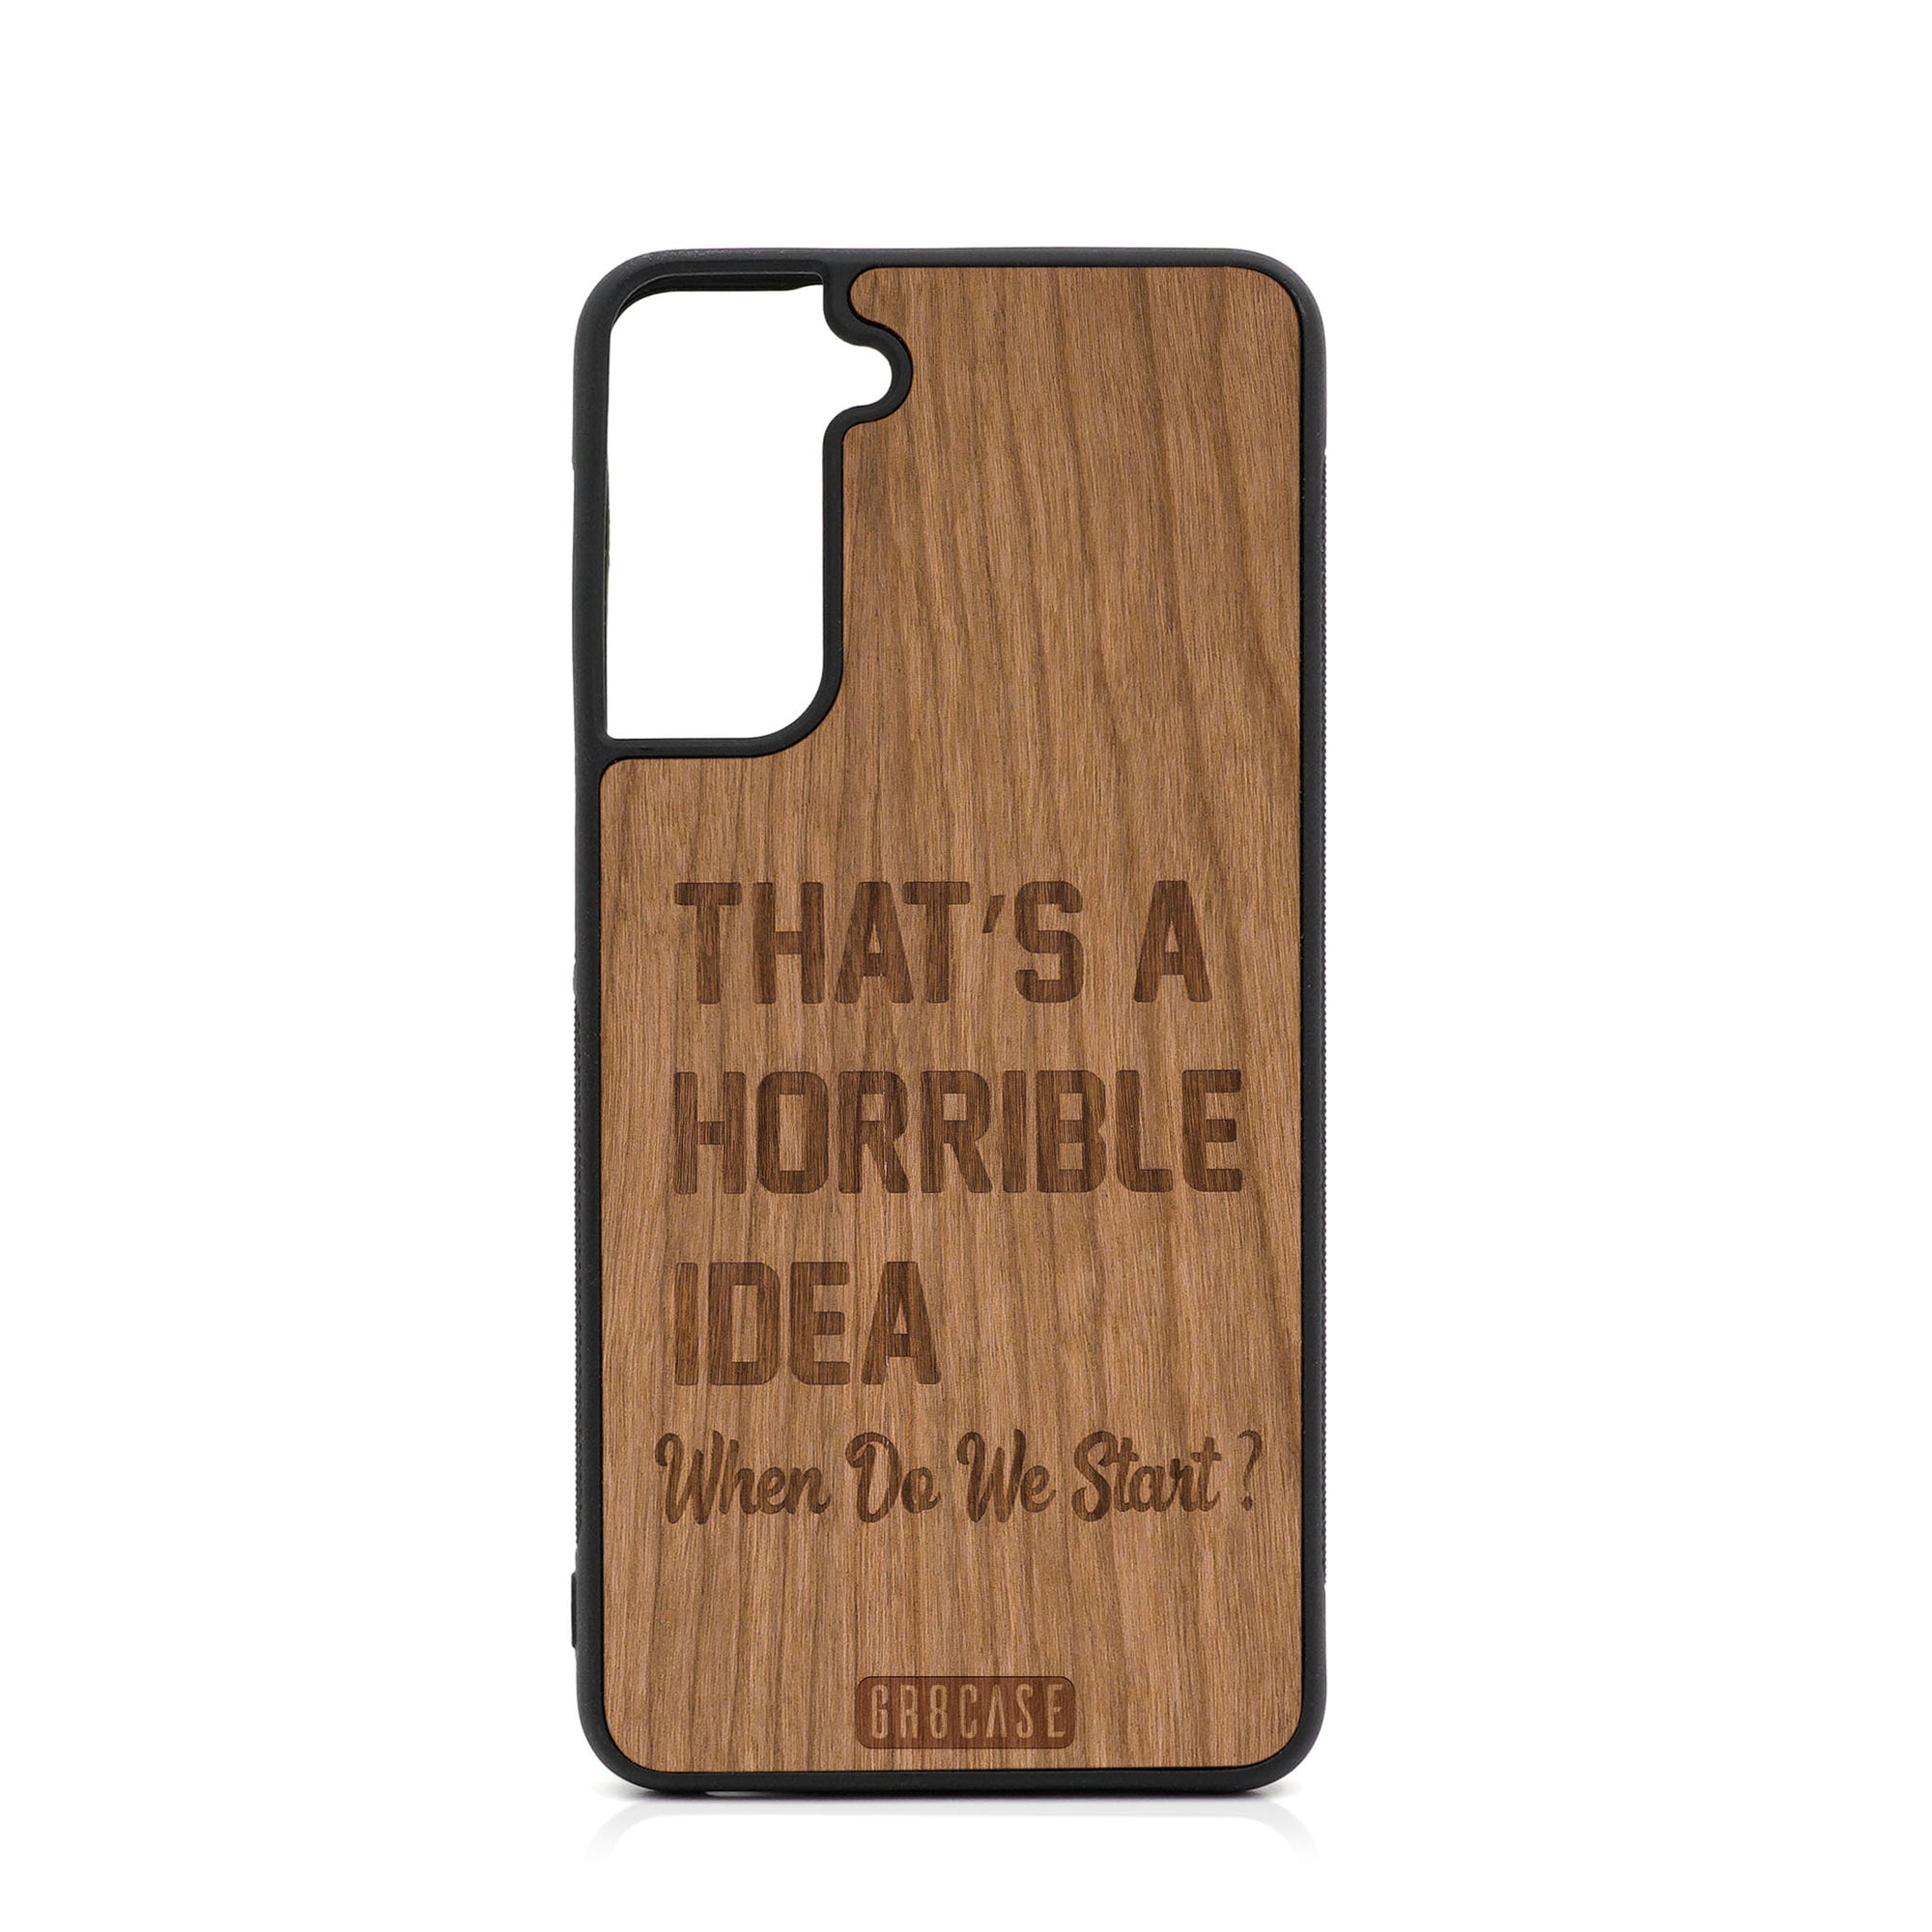 That's A Horrible Idea When Do We Start? Design Wood Case For Samsung Galaxy S21 Plus 5G